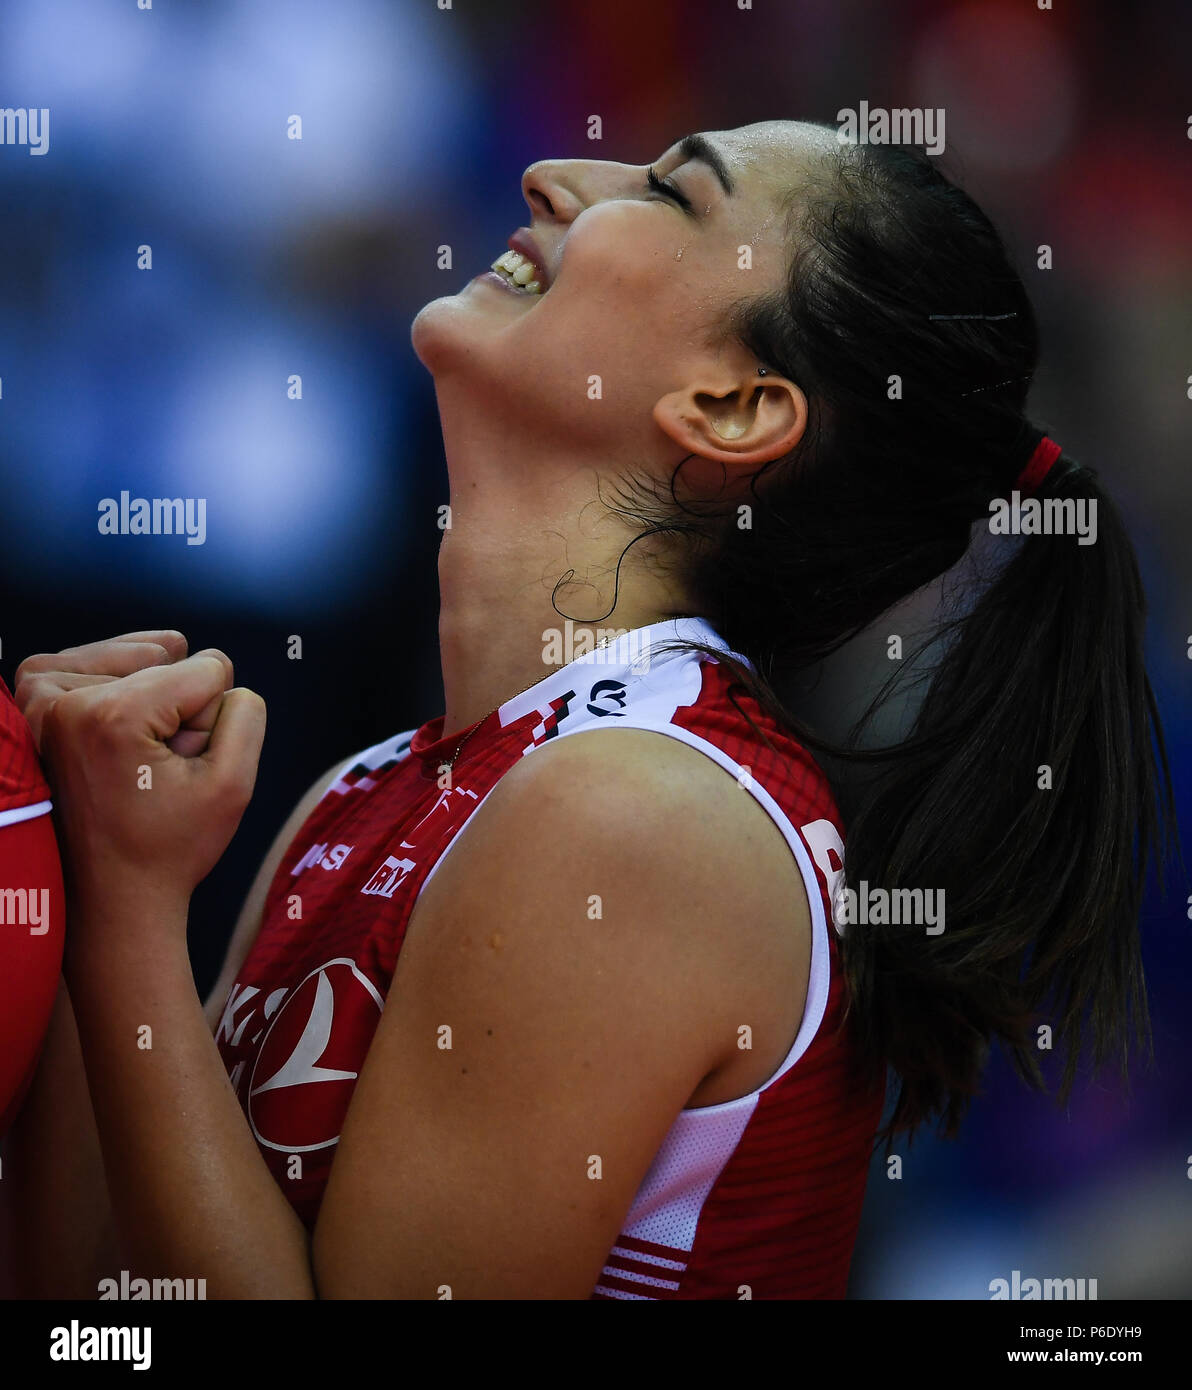 Nanjing China S Jiangsu Province 30th June 2018 Hande Baladin Of Turkey Celebrates After Winning The Semifinal Match Between Turkey And Brazil At The 2018 Fivb Volleyball Nations League Women S Finals In Nanjing